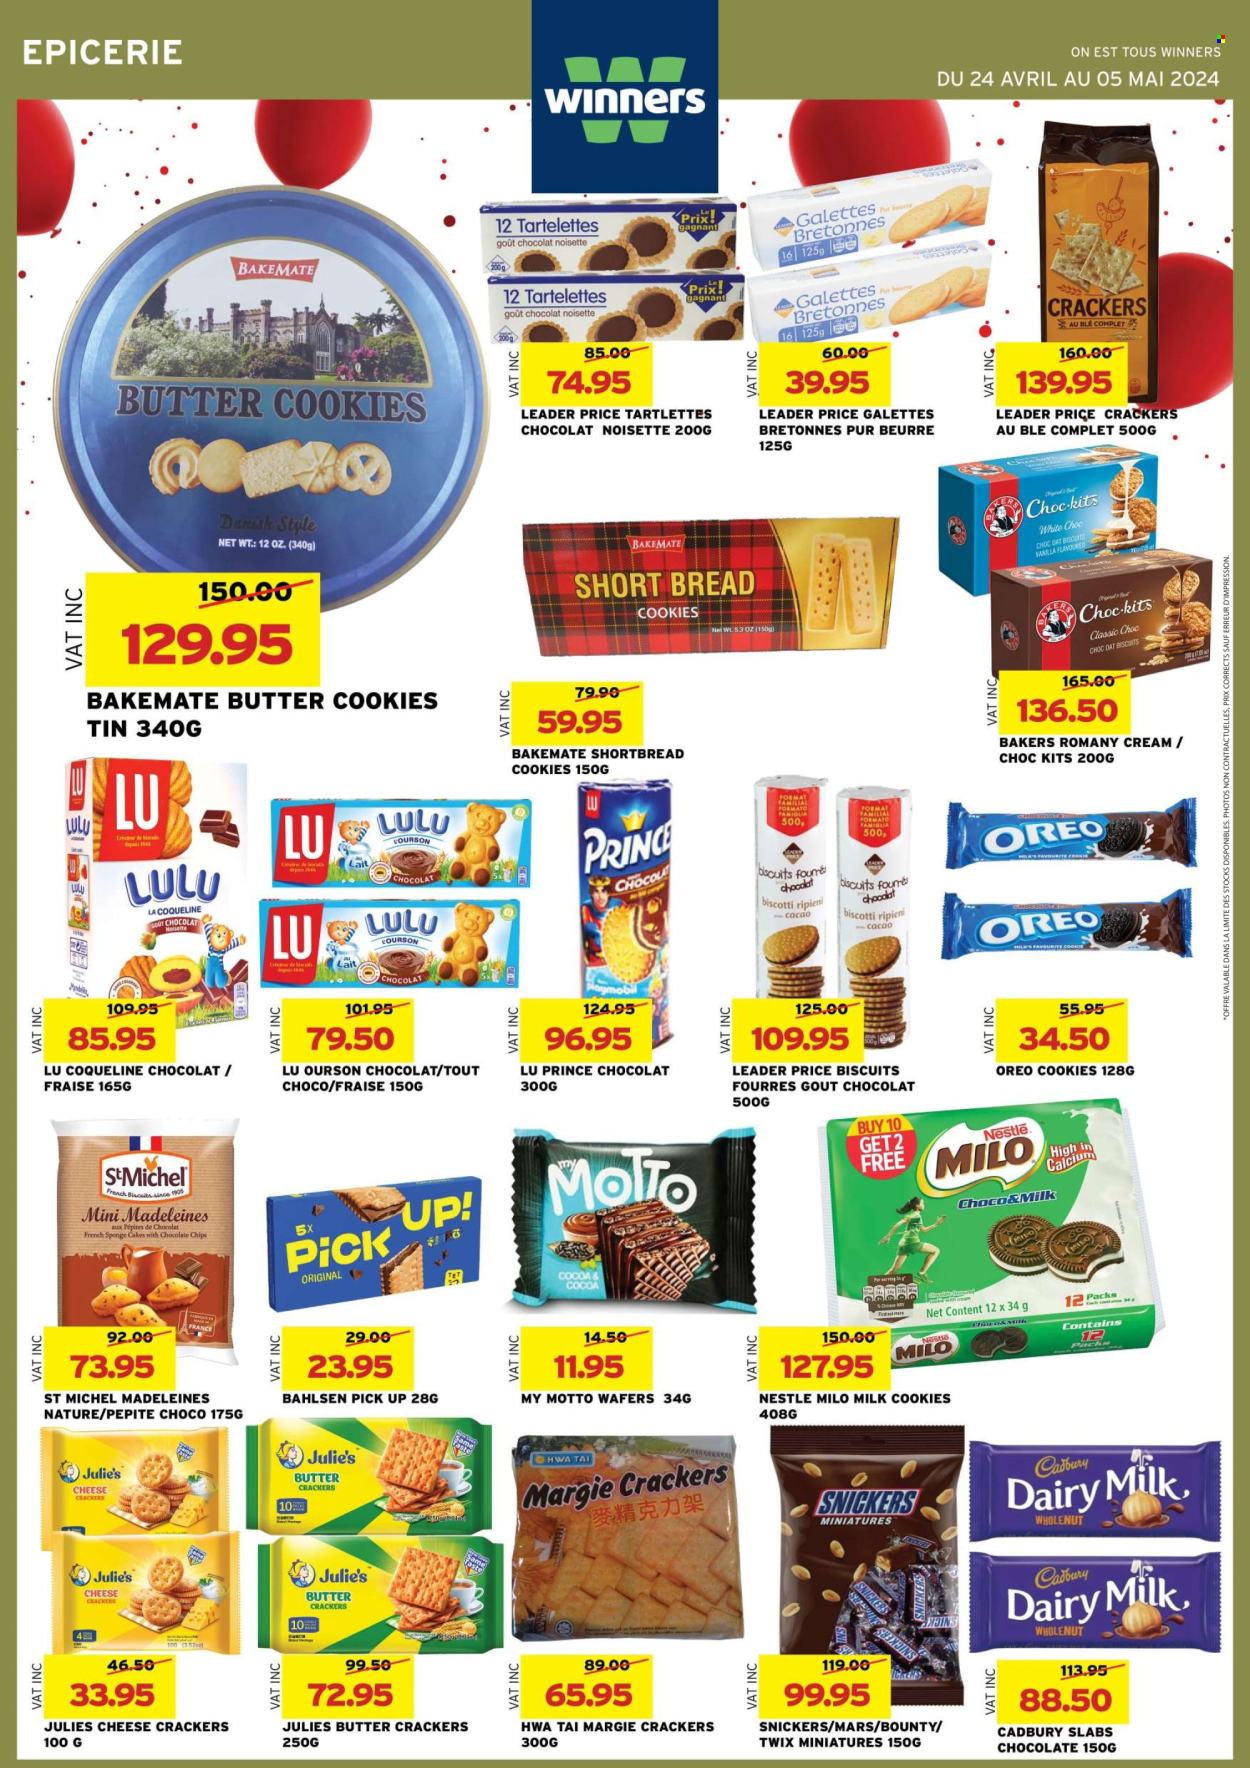 thumbnail - Winner's Catalogue - 24.04.2024 - 5.05.2024 - Sales products - cake, indian bread, sponge cake, sweet bread, ham, Oreo, Milo, biscotti, cookies, wafers, chocolate, butter cookies, Snickers, Twix, Bounty, Mars, crackers, biscuit, Cadbury, Julie's, Dairy Milk, salty snack, Bakers, Nestlé. Page 26.